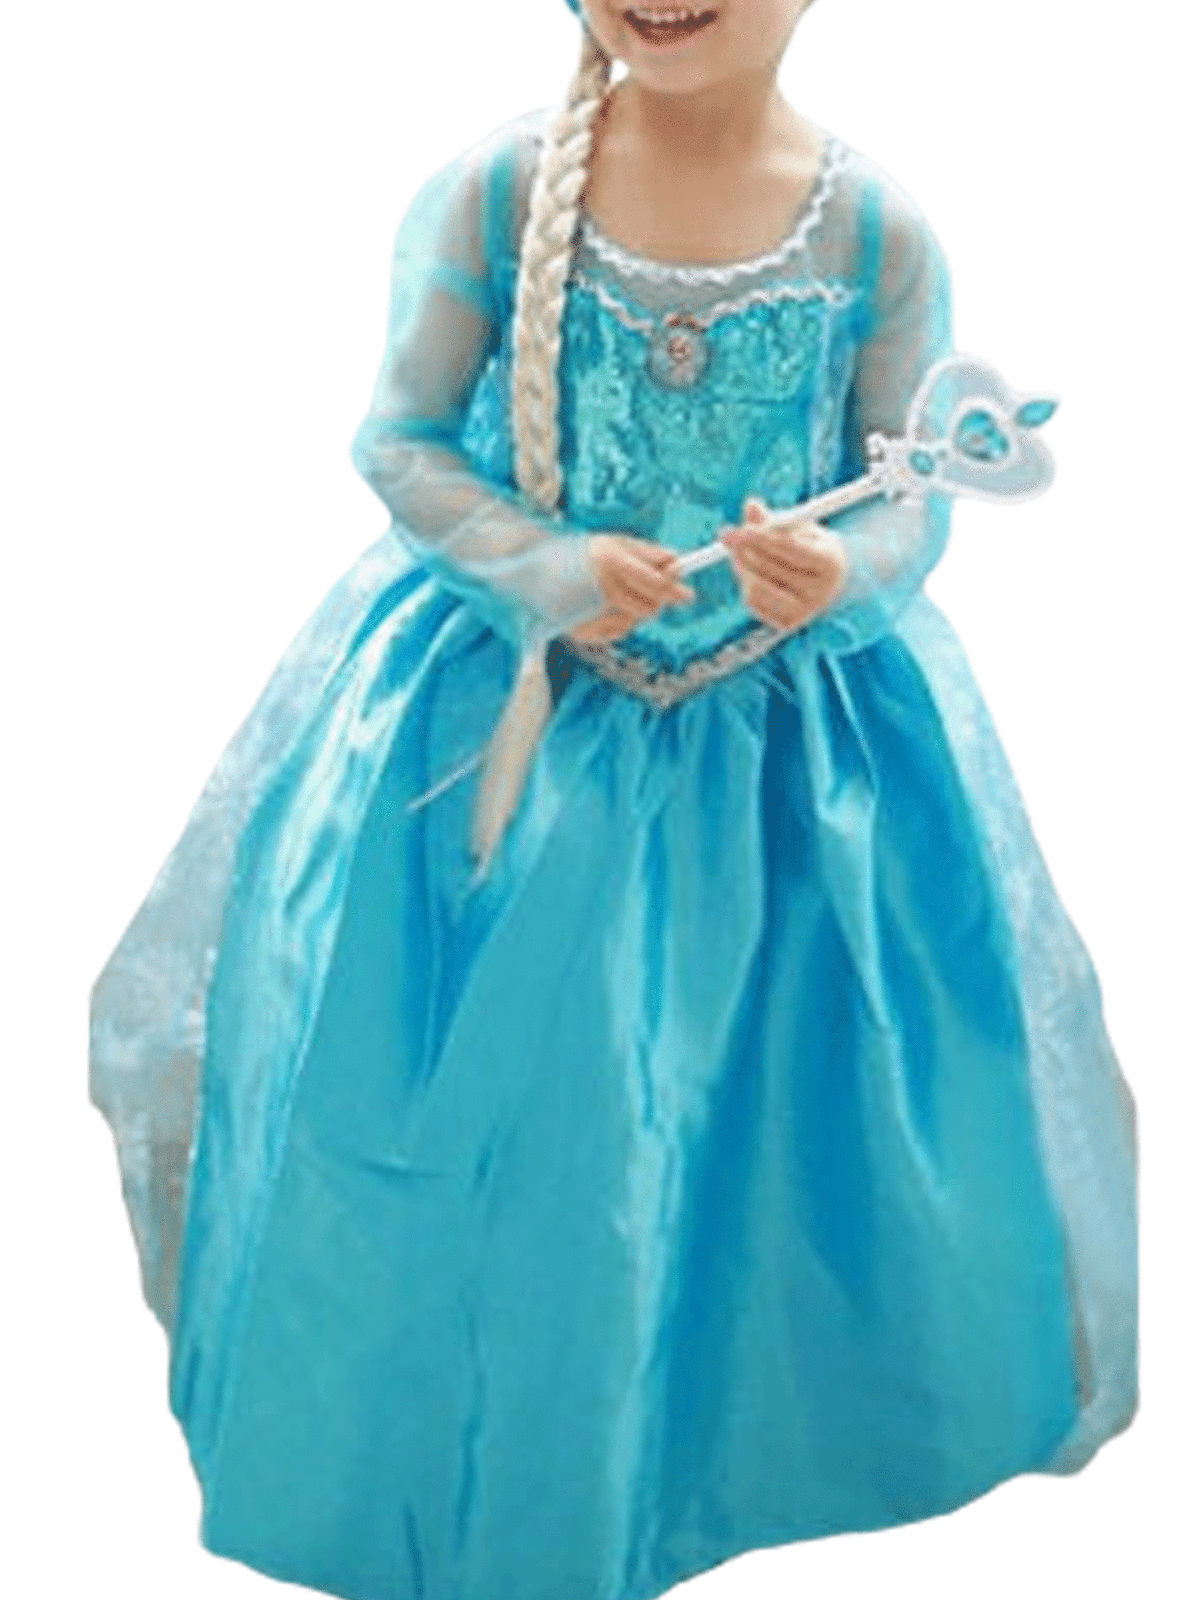 «´¨`• Princess Frozen Fever Elsa Costume 7/8..°•´¨`» FREE Shipping from US! 